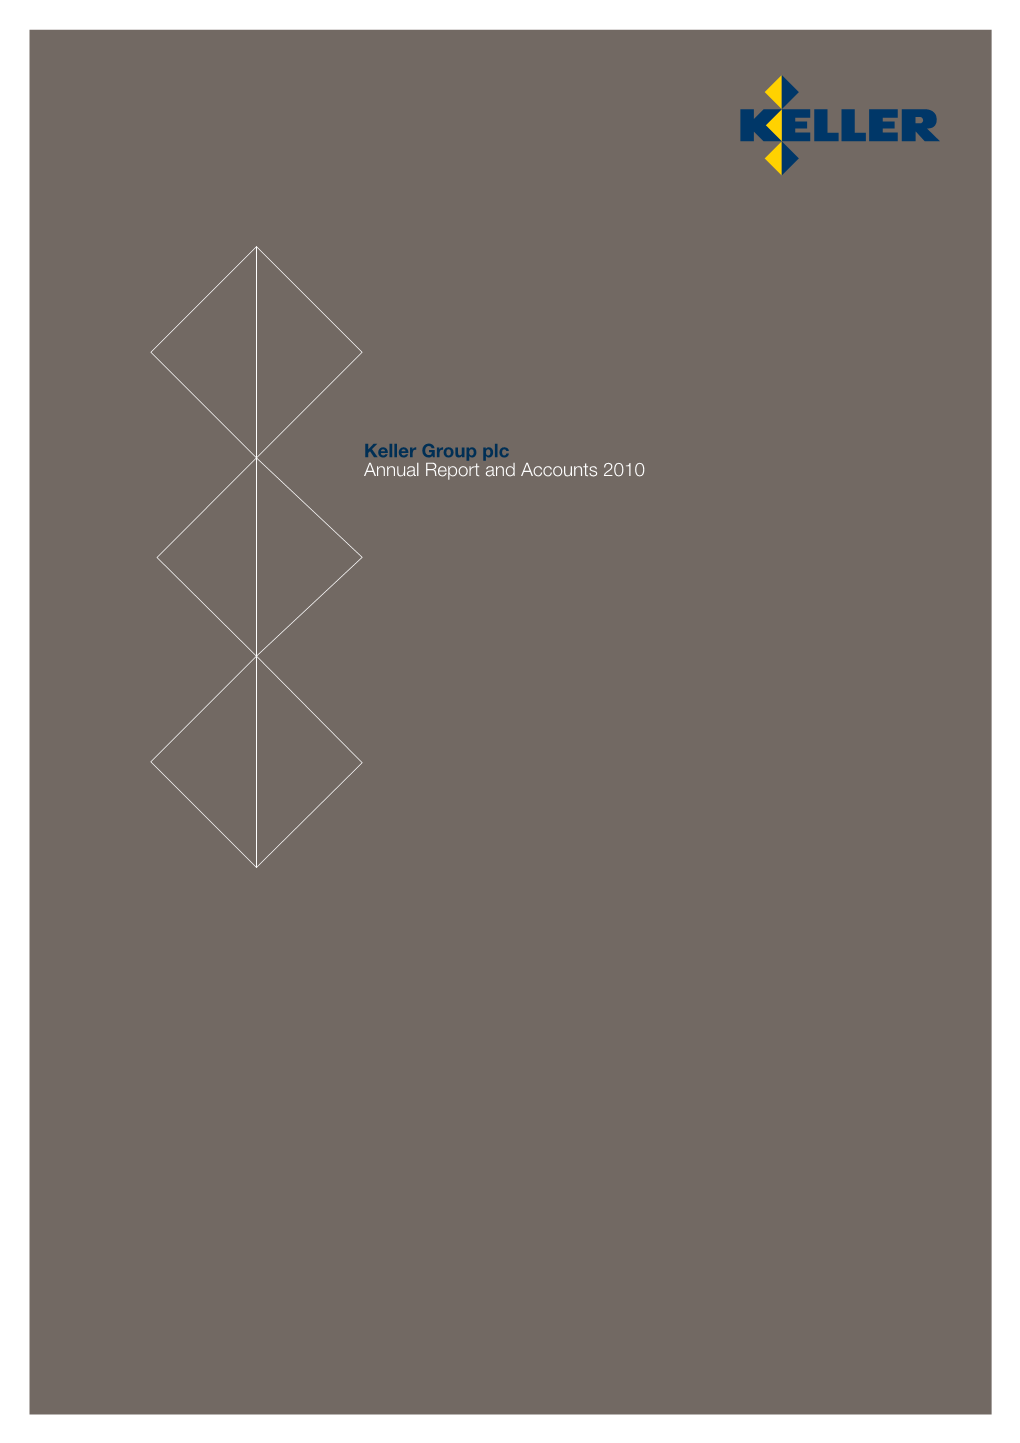 Keller Group Plc Annual Report and Accounts 2010